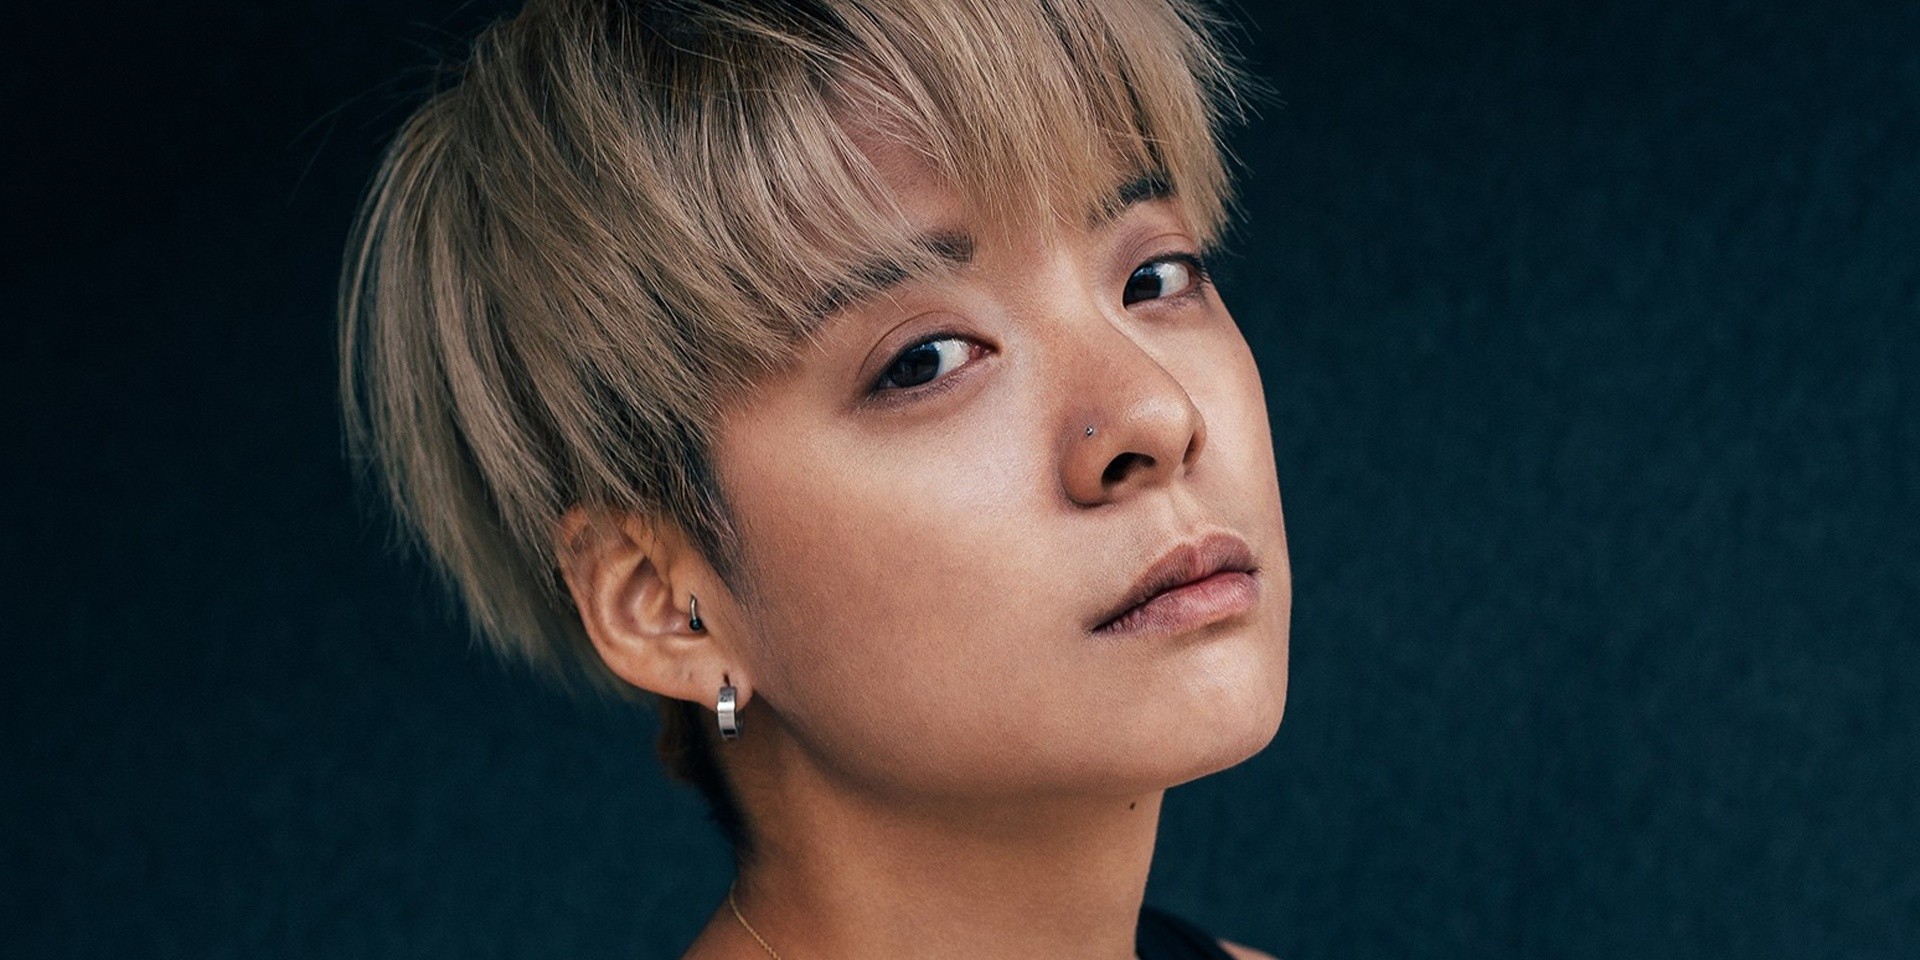 Amber Liu drops back-to-back releases 'blue' and 'vegas' – watch